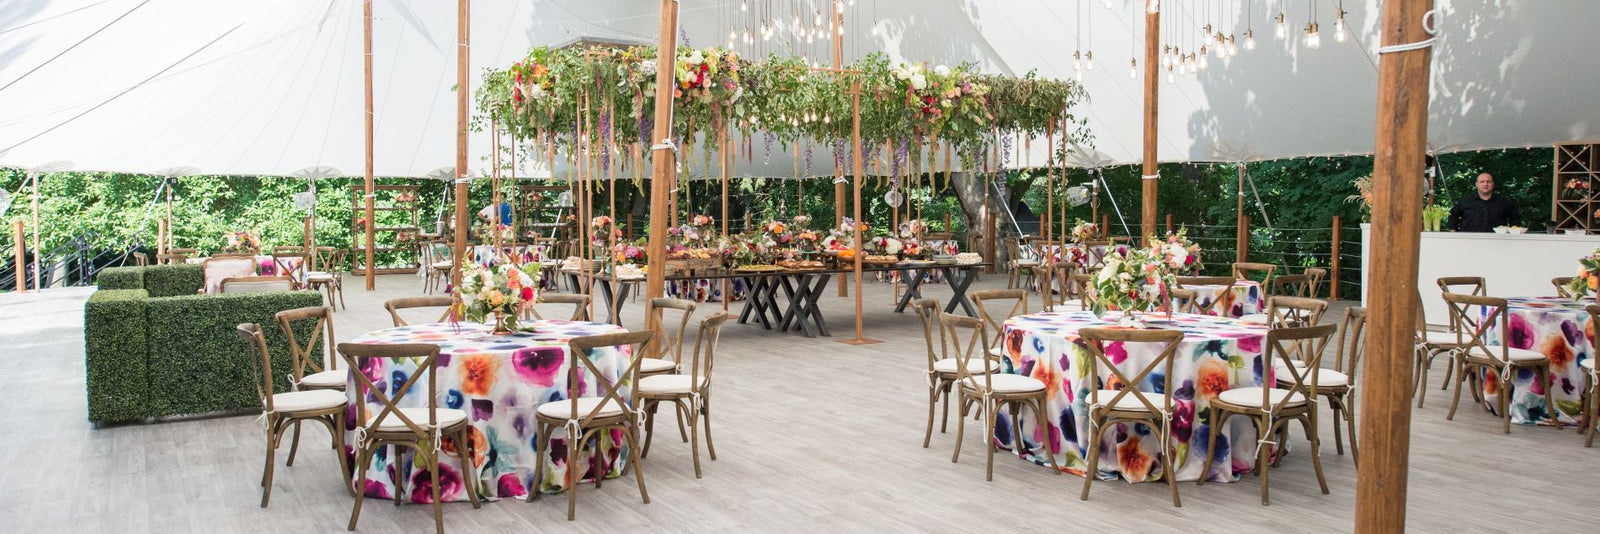 dramatic and colorful tented wedding in Pittsford with hanging floral installation